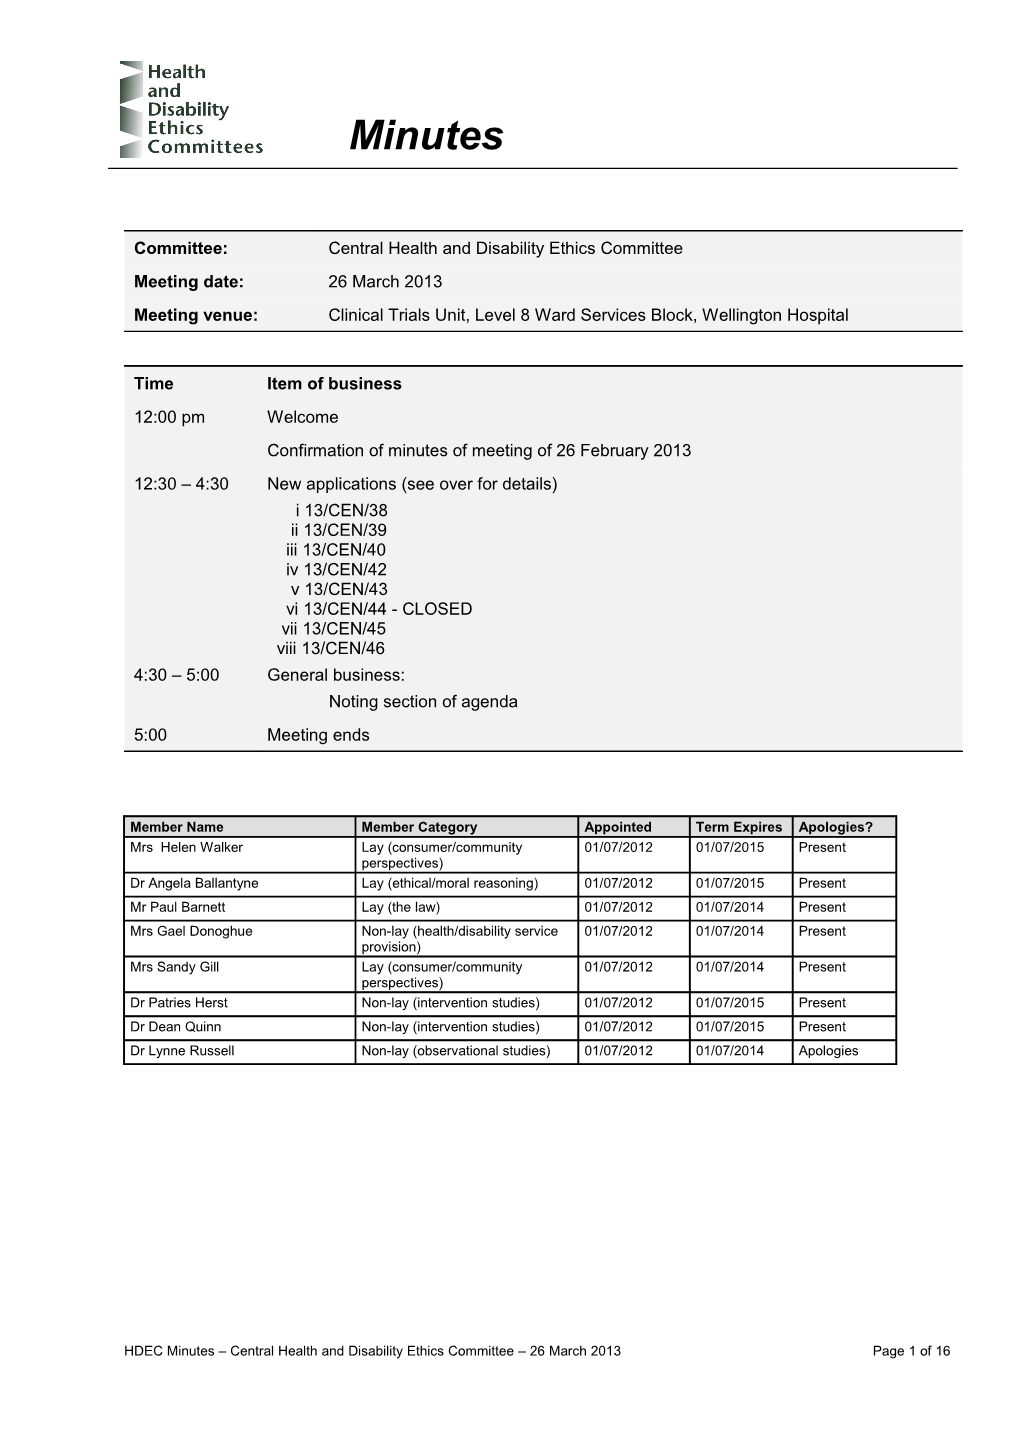 Central Health and Disability Ethics Committee: Minutes 26 March 2013